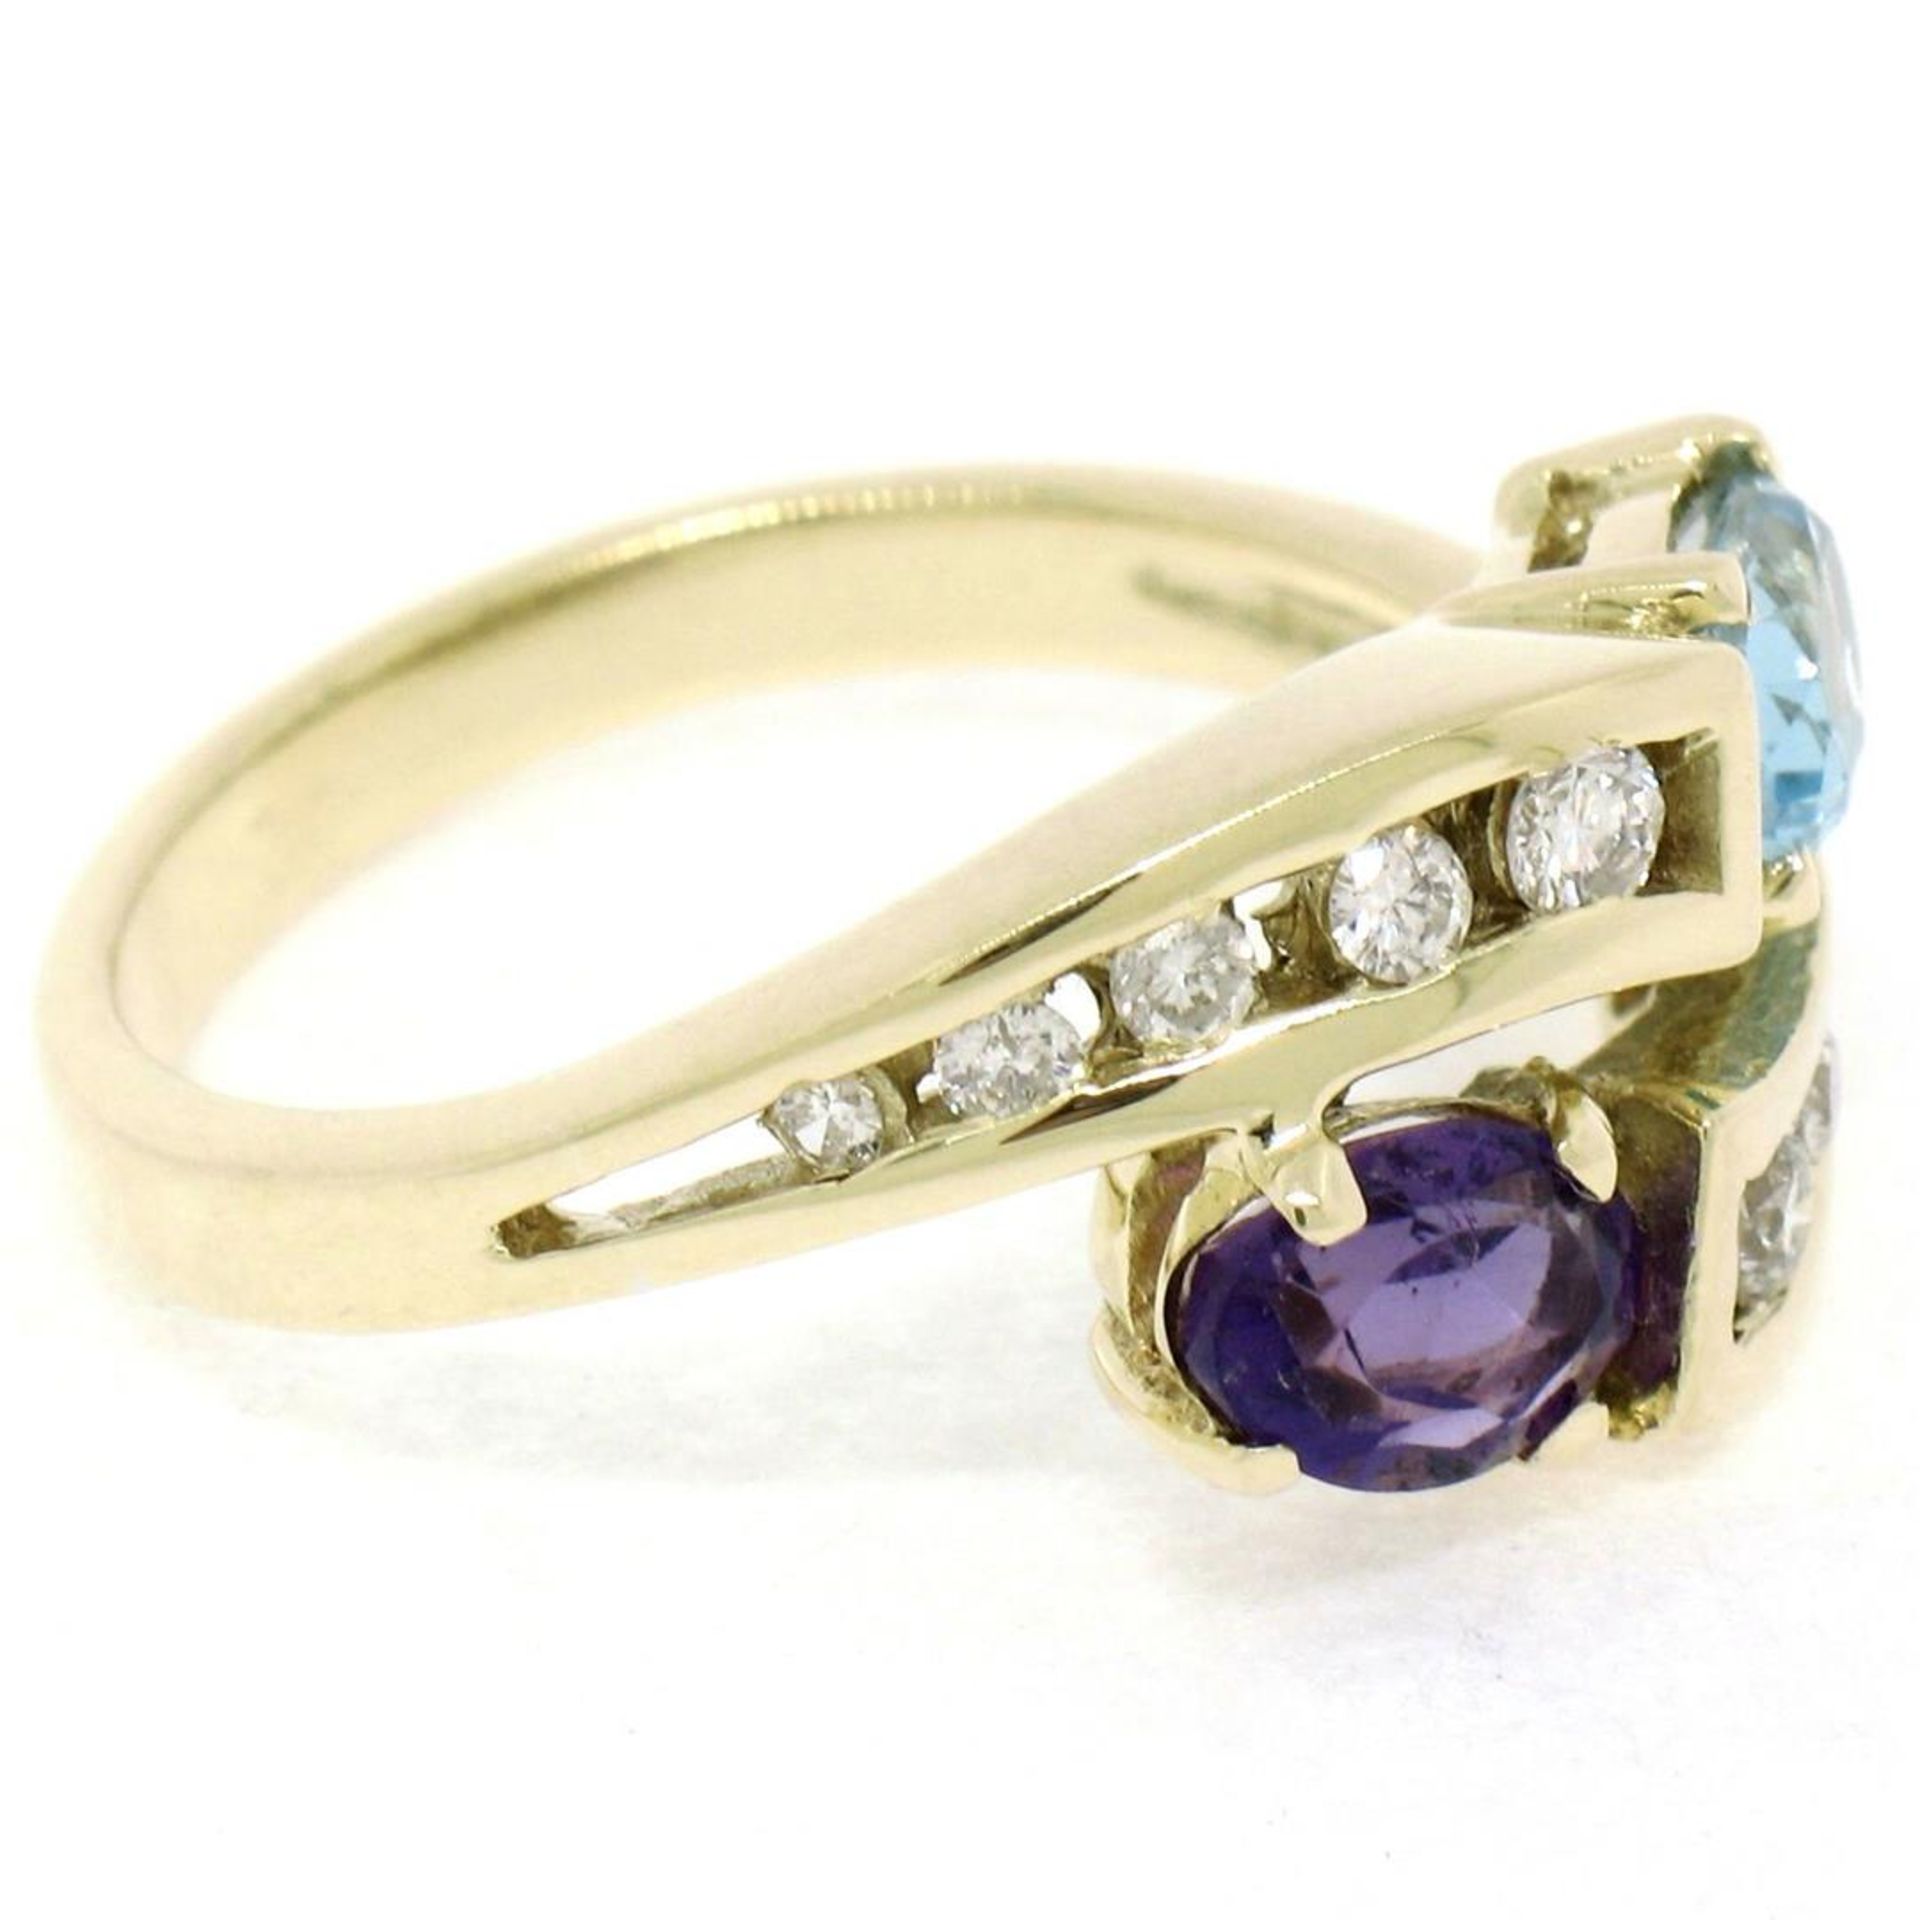 14K Yellow Gold 1.21 ctw Oval Amethyst & Blue Topaz Bypass Ring w/ Round Diamond - Image 7 of 9